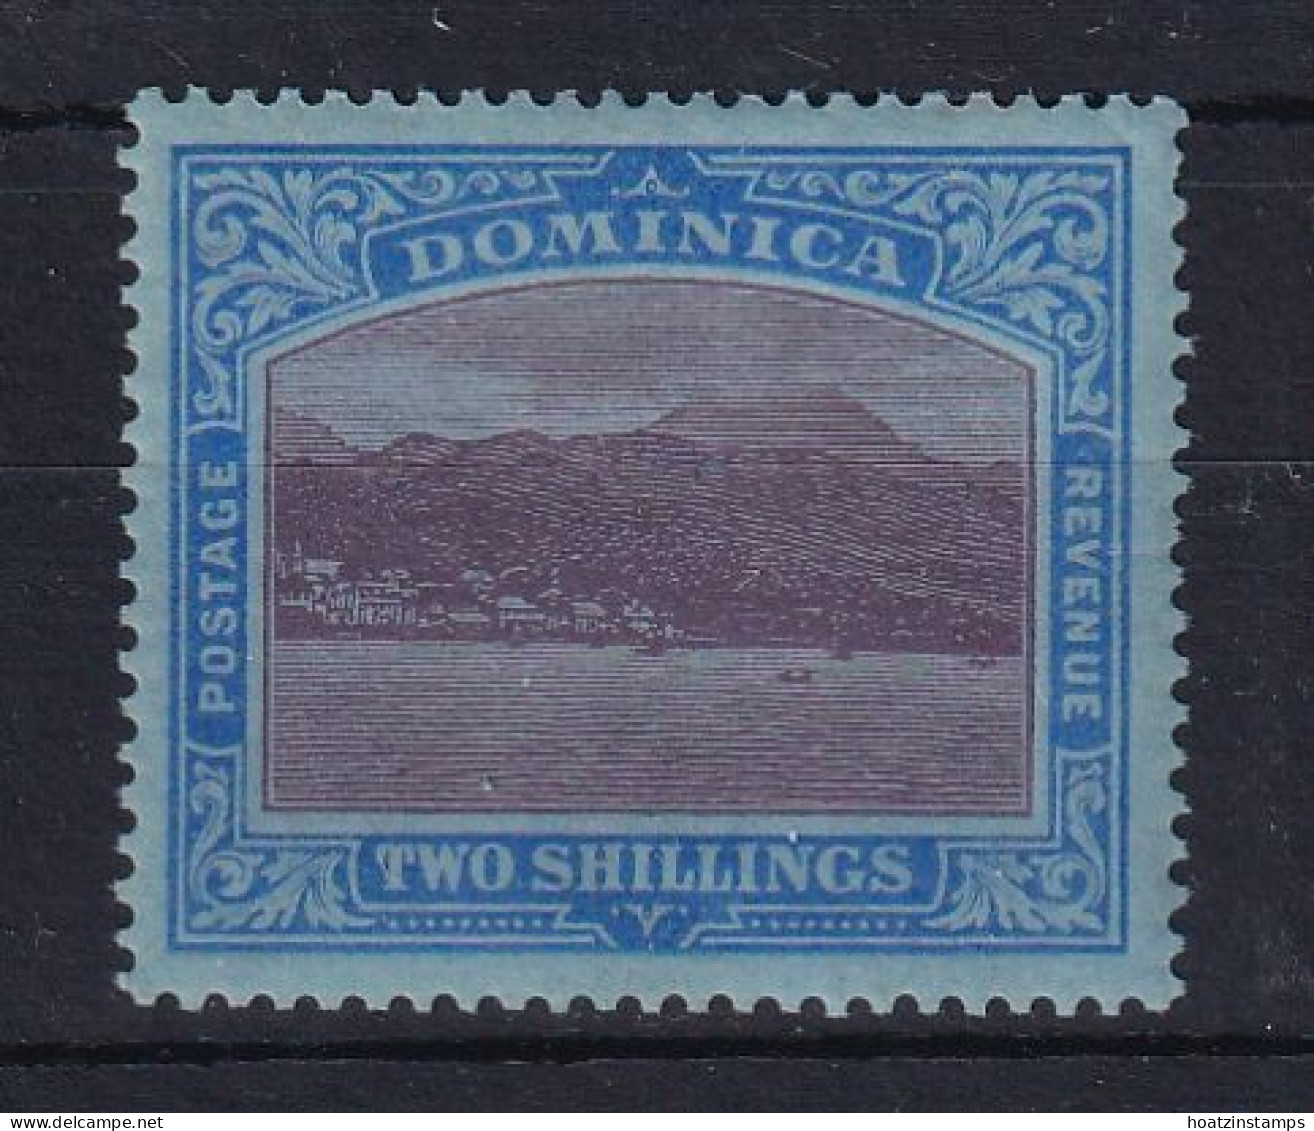 Dominica: 1921/22   Rouseau From The Sea    SG69    2/-      MH - Dominica (...-1978)